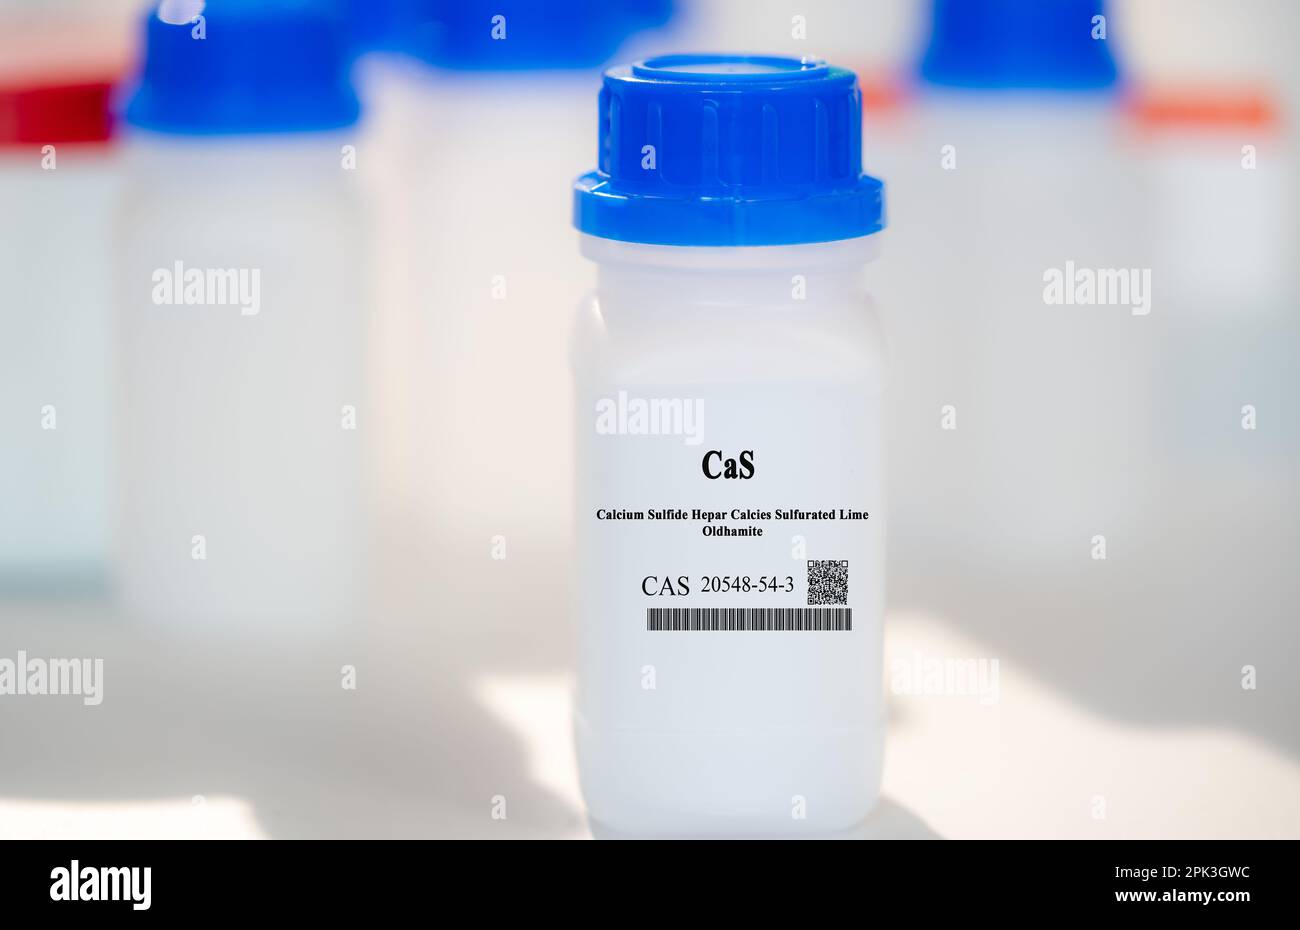 CaS calcium sulfide hepar calcies sulfurated lime oldhamite CAS 20548-54-3 chemical substance in white plastic laboratory packaging Stock Photo